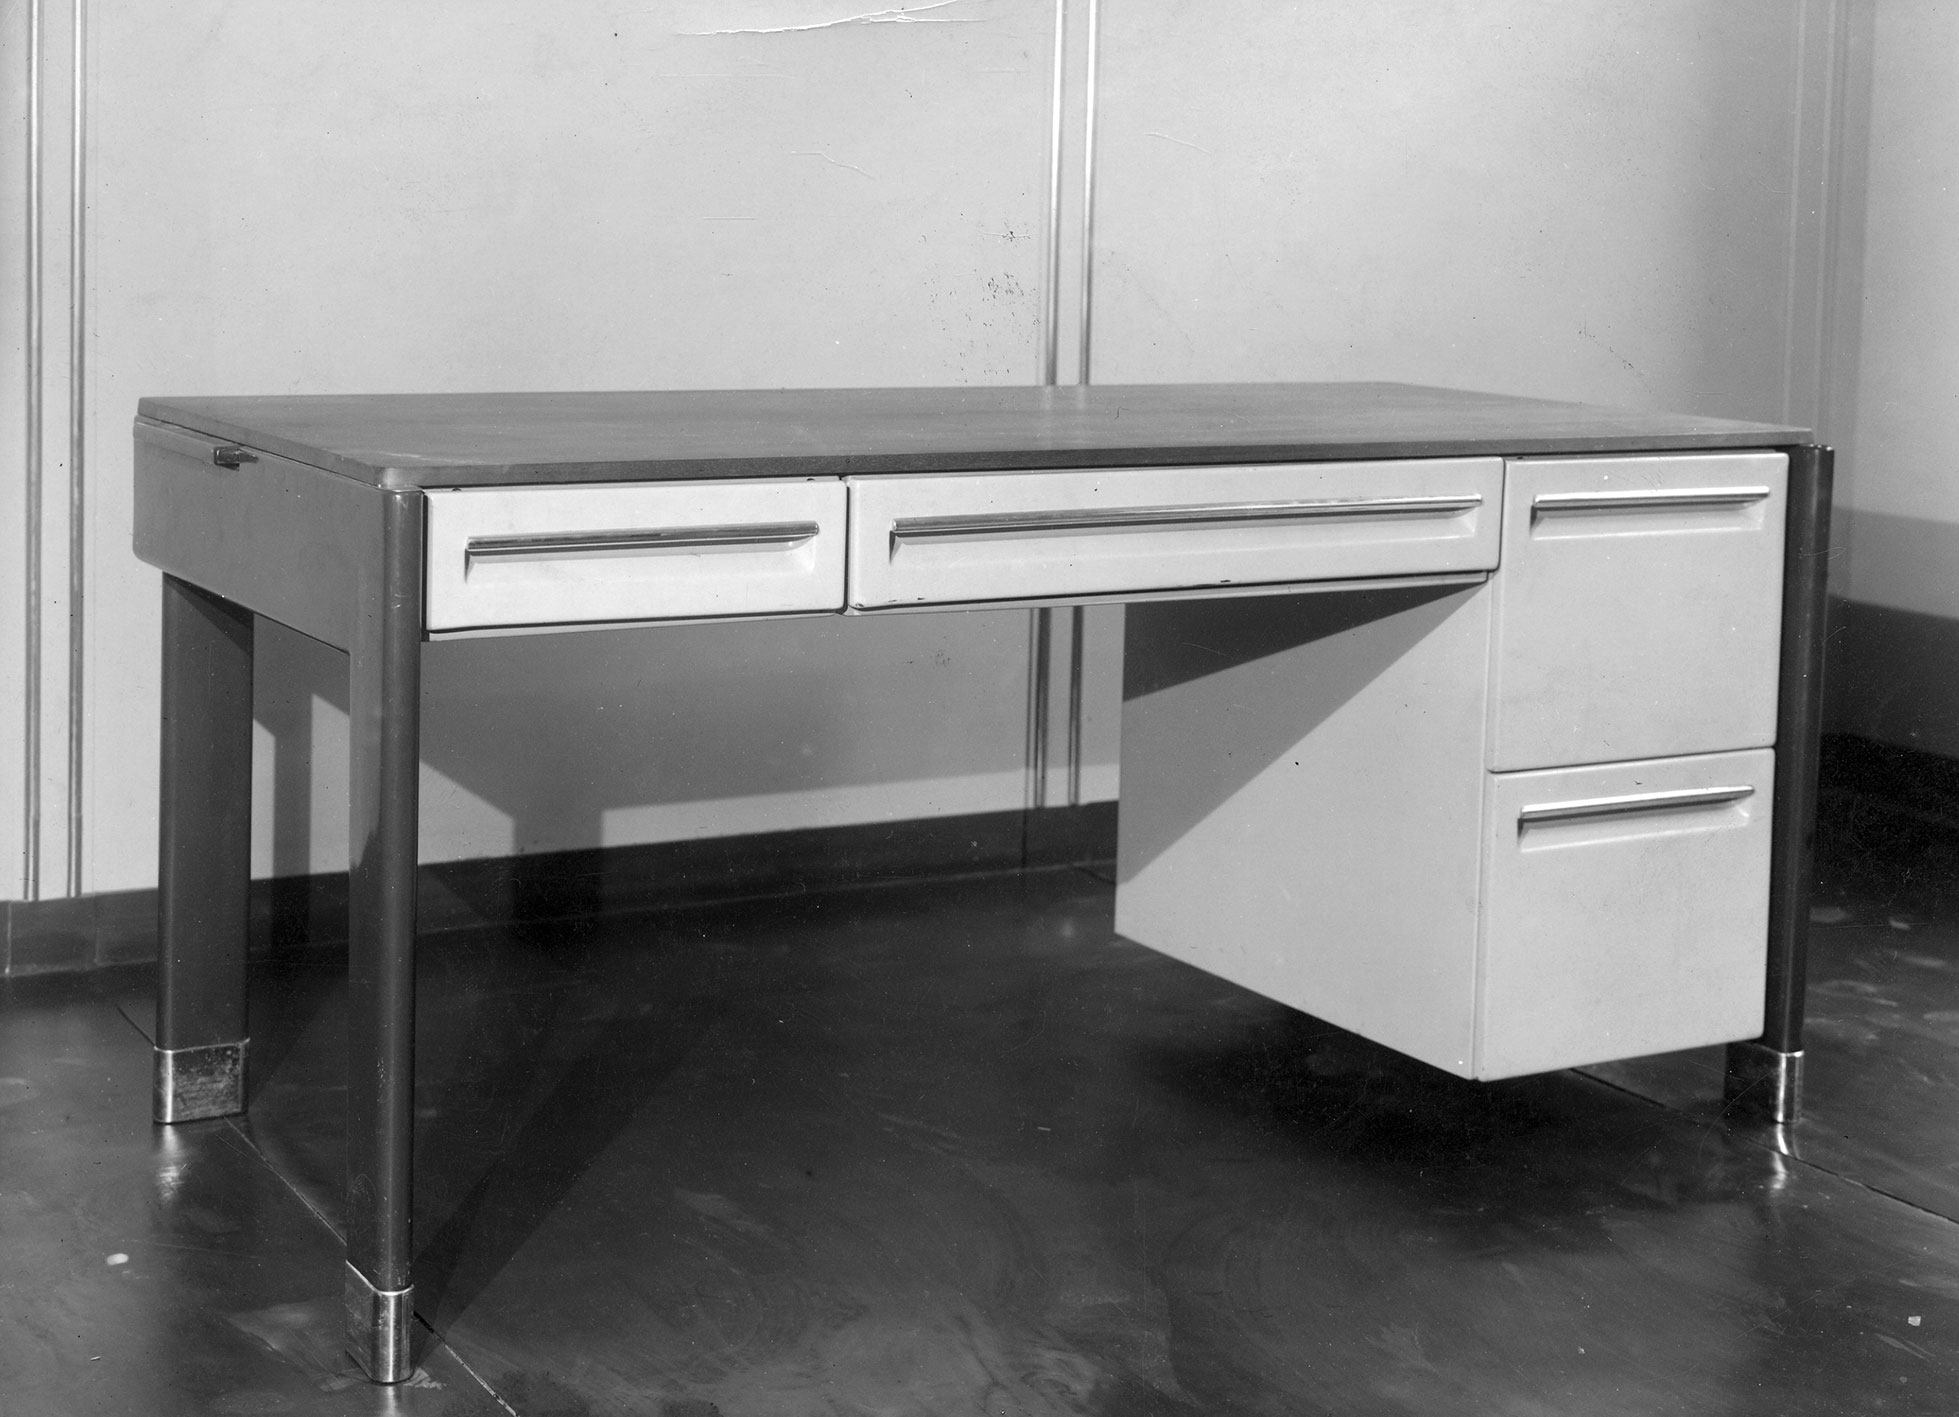 Desk type CPDE with variable fittings, standard model, with no. 2 fittings and stainless steel feet, ca. 1936.